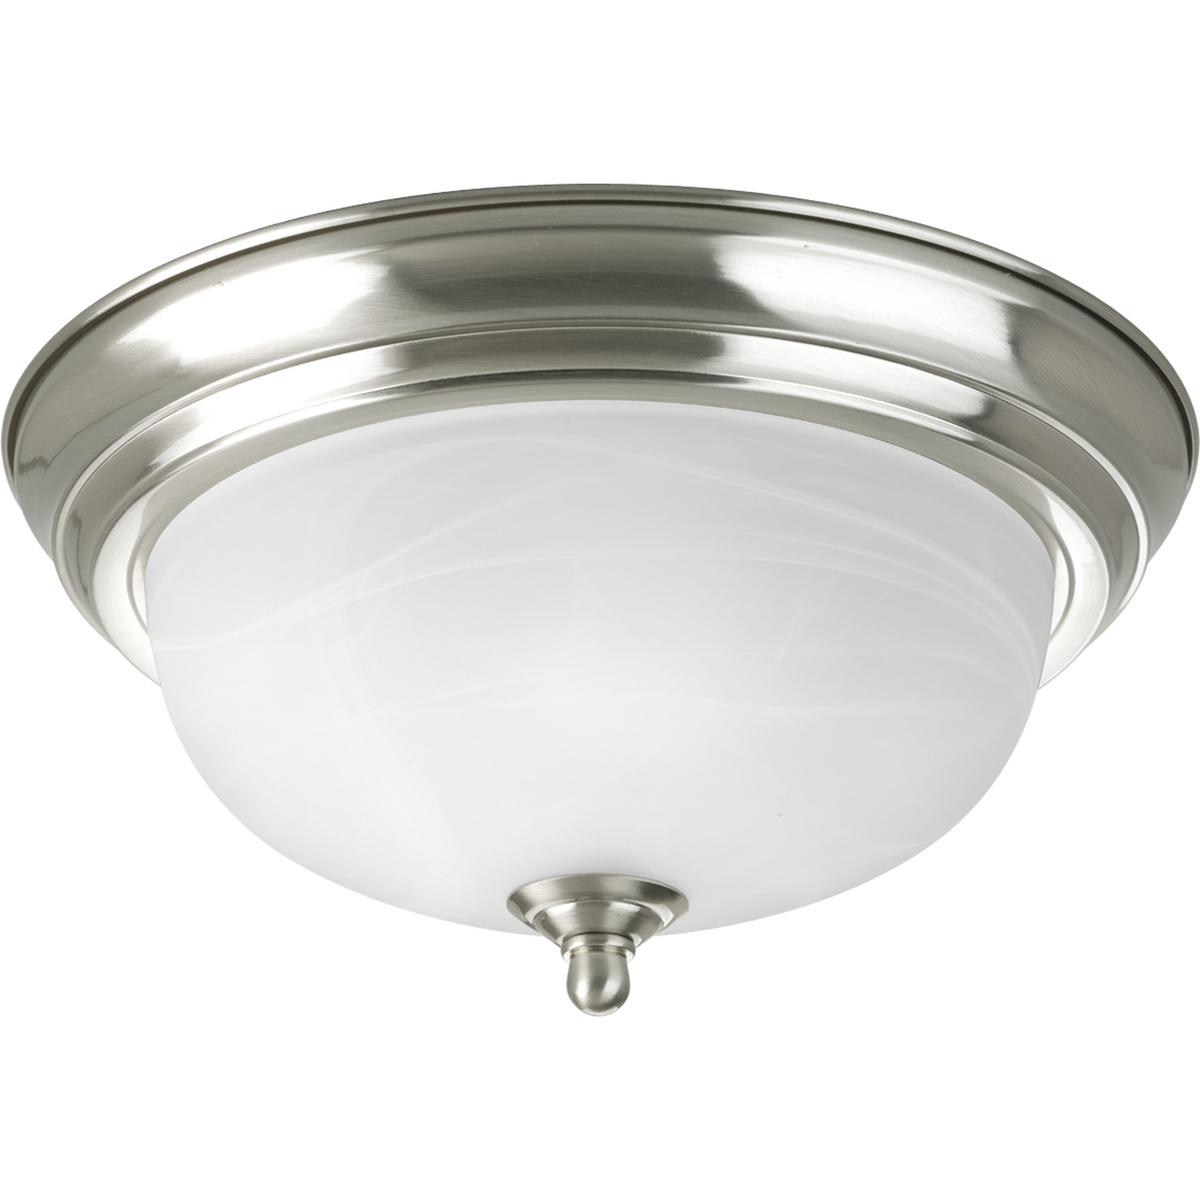 Hubbell P3924-09 One-light 11" flush mount with dome shaped alabaster glass, solid trim and decorative knobs. Center lock-up with matching finial. Brushed Nickel finish.  ; Brushed Nickel finish. ; Alabaster Glass. ; Decorative details. ; Requires one (1) 60-watt bulbs (n